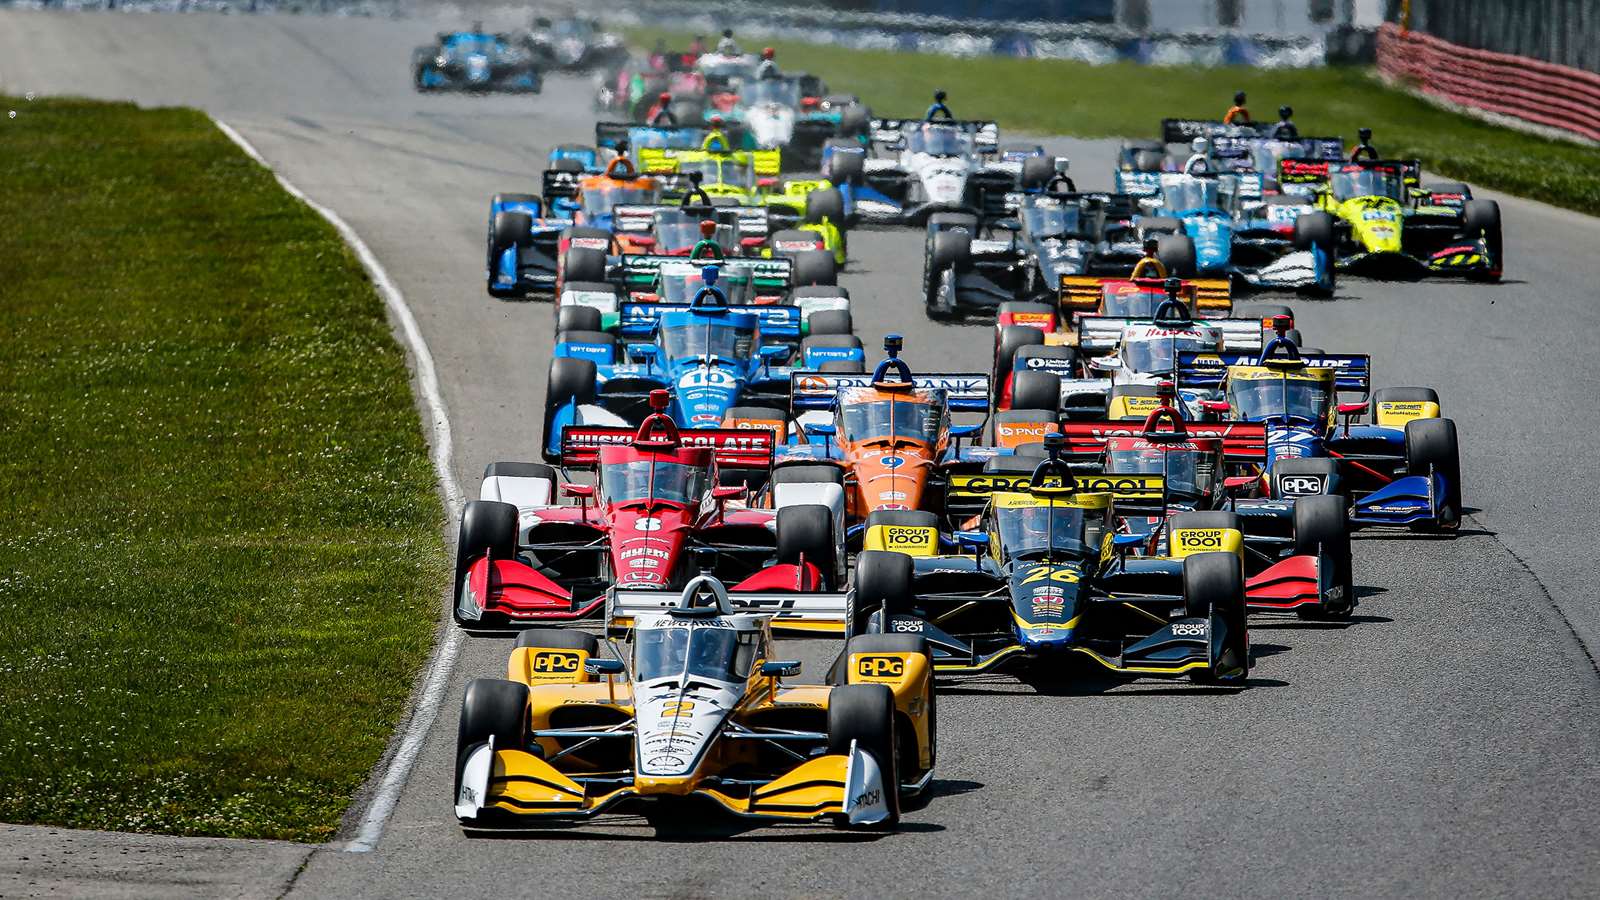 Mid Ohio Race Schedule 2022 2022 Indycar Calendar And Standings | Grr